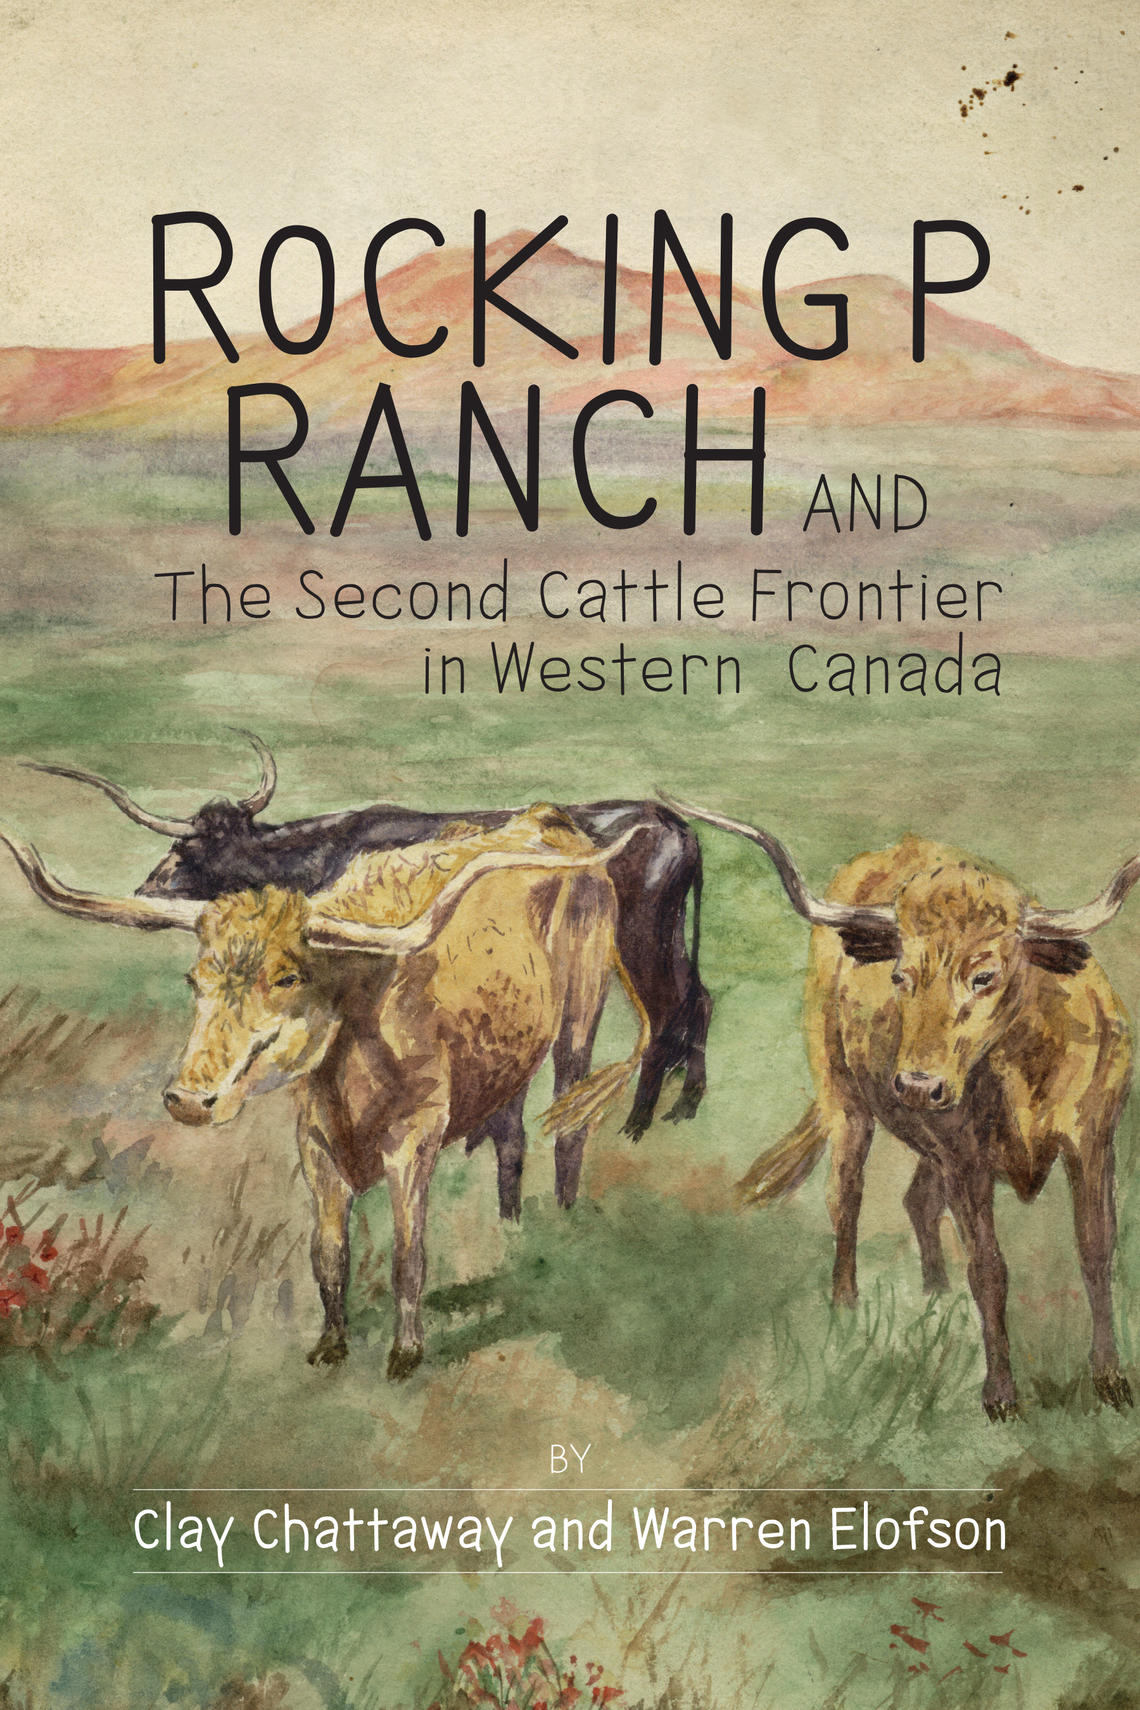 Rocking P Ranch and the Second Cattle Frontier in Western Canada examines the role of Rocking P Ranch in the history of southern Alberta. It is the 100th open access book published by the University of Calgary Press. 